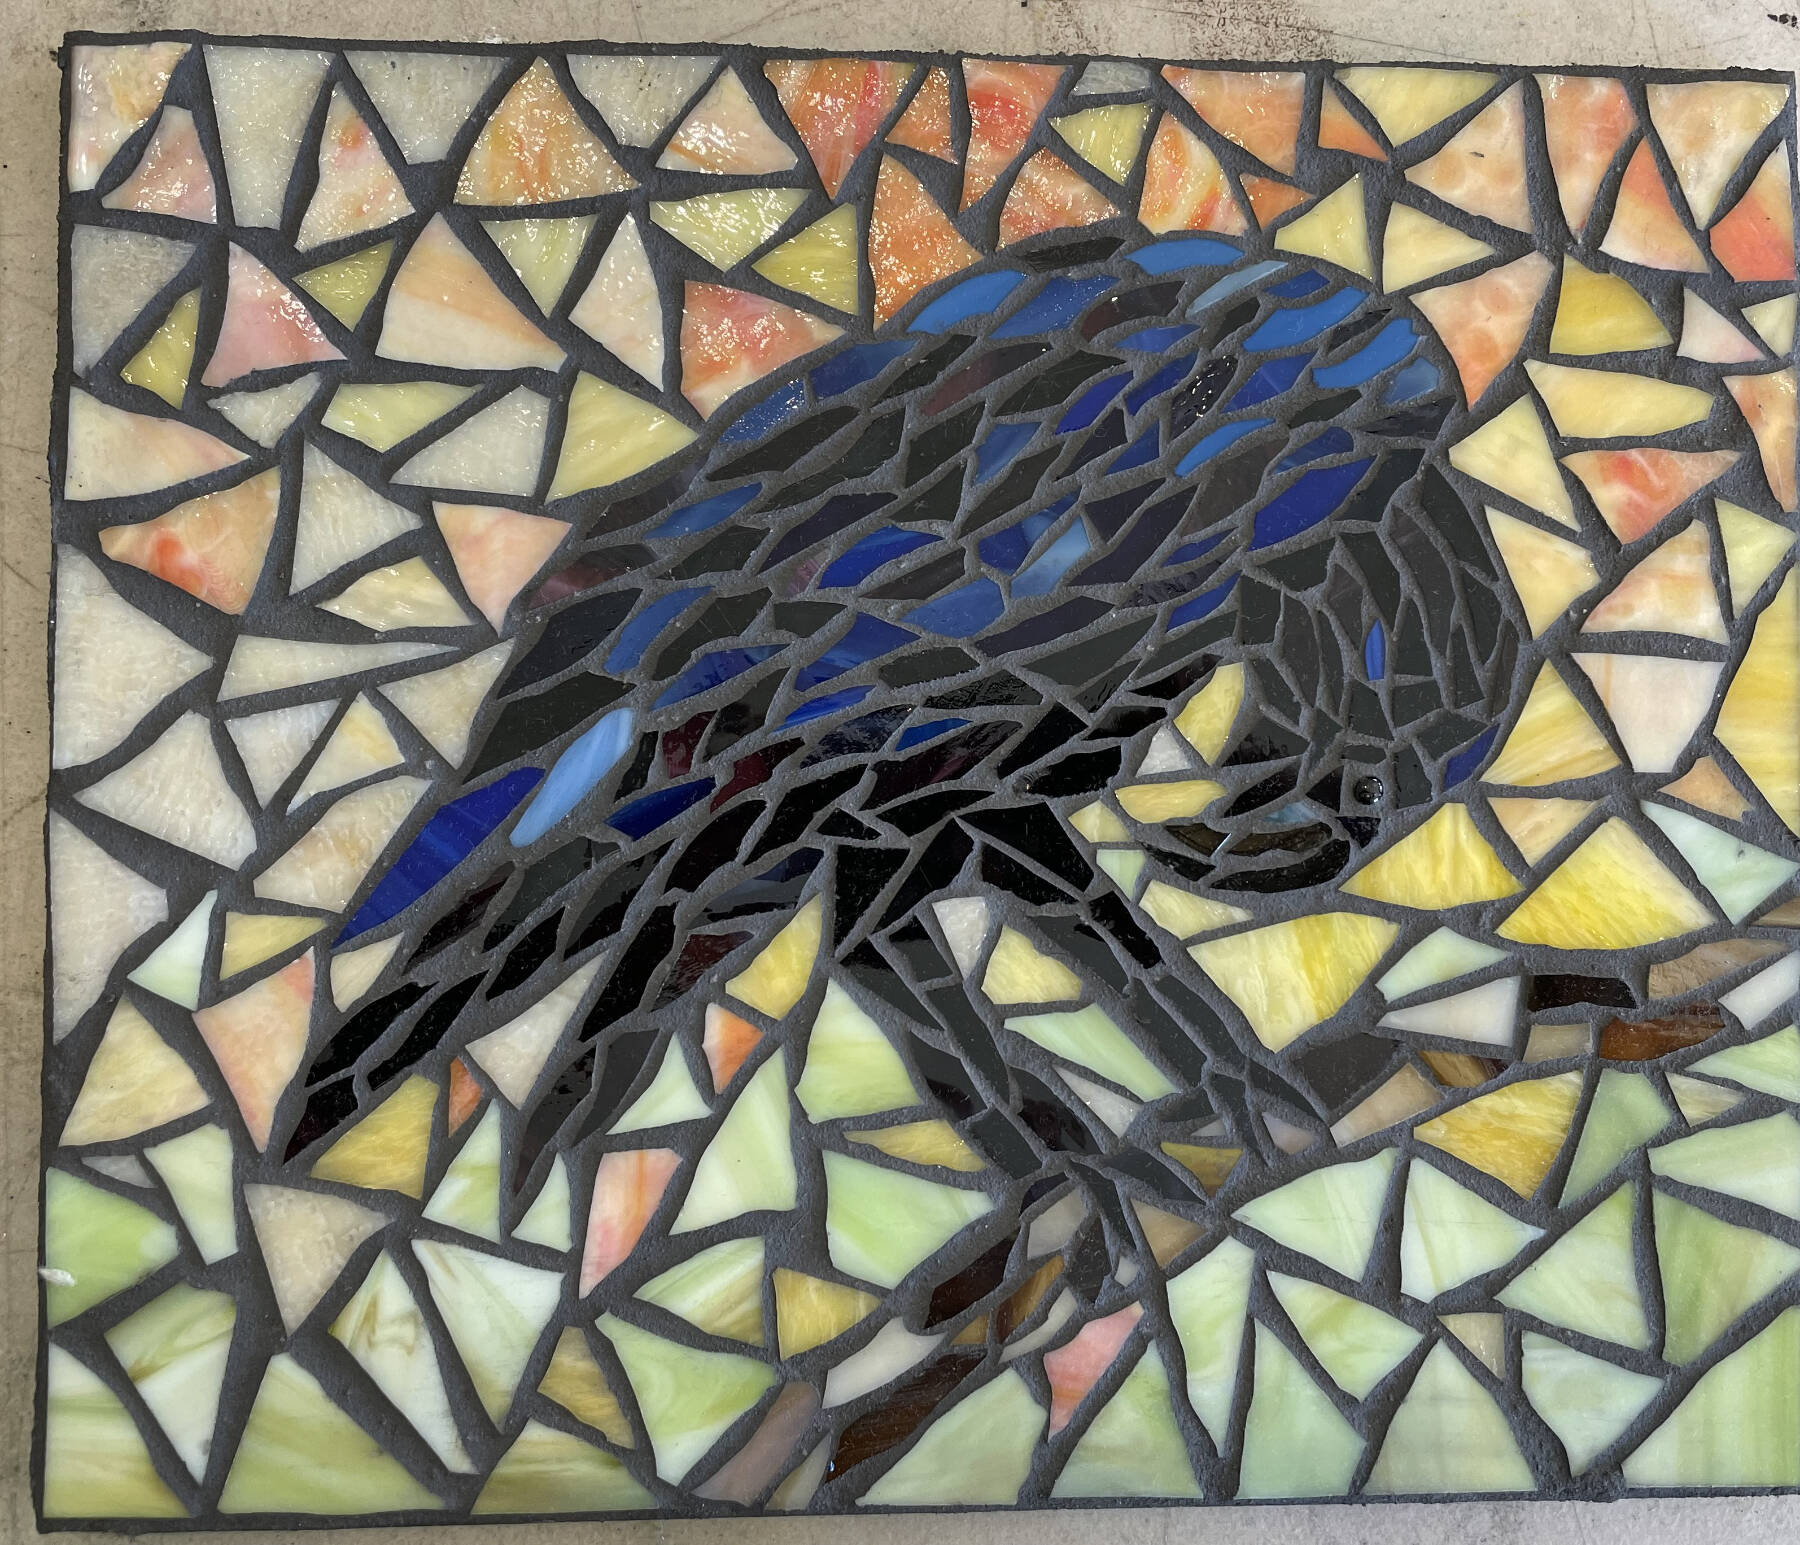 "Curious One" is a mosaic piece created by Cindy Nelson, whose work is available year-round at Ptarmigan Arts. Photo provided by Cindy Nelson